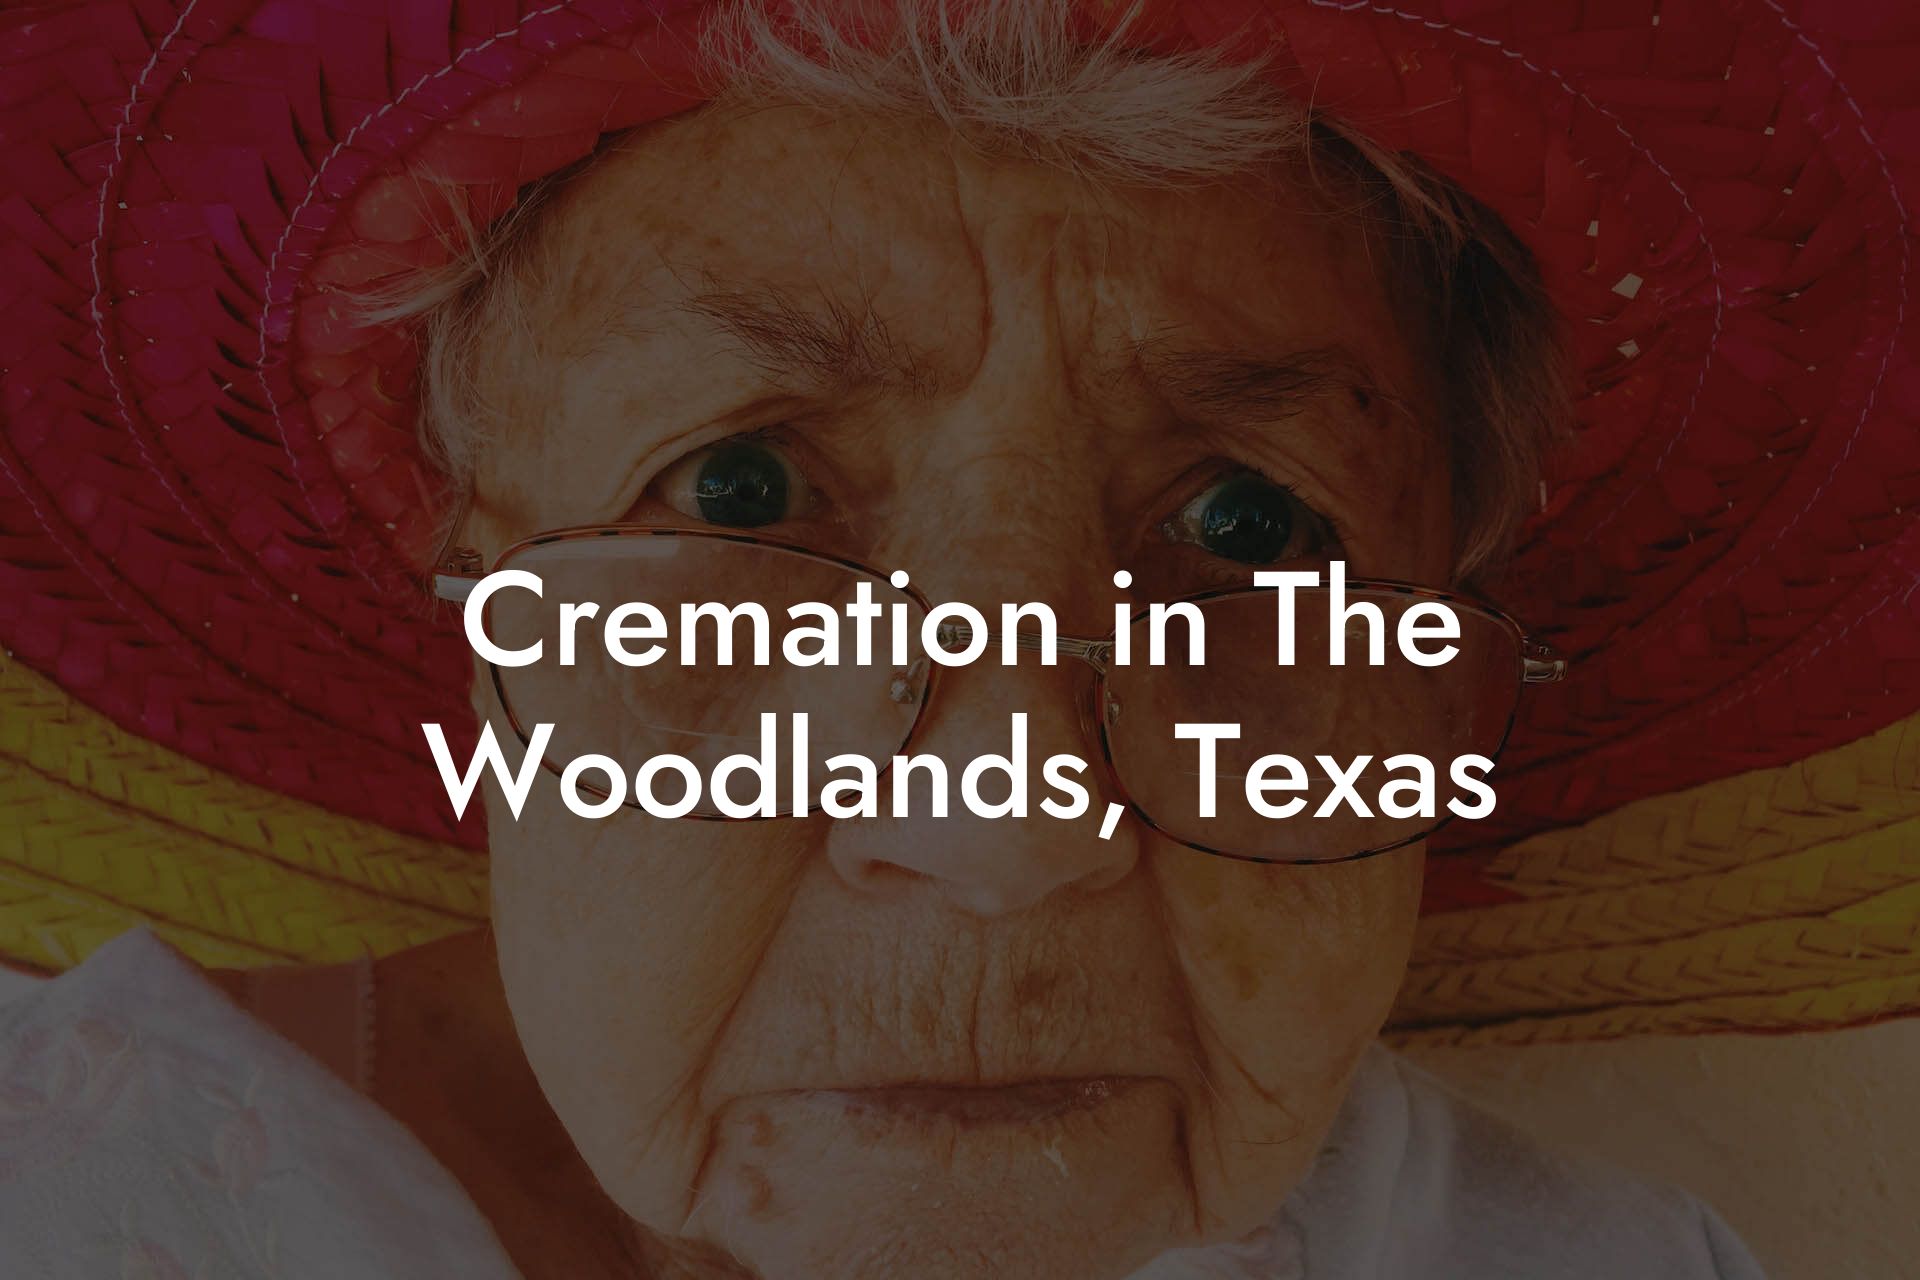 Cremation in The Woodlands, Texas